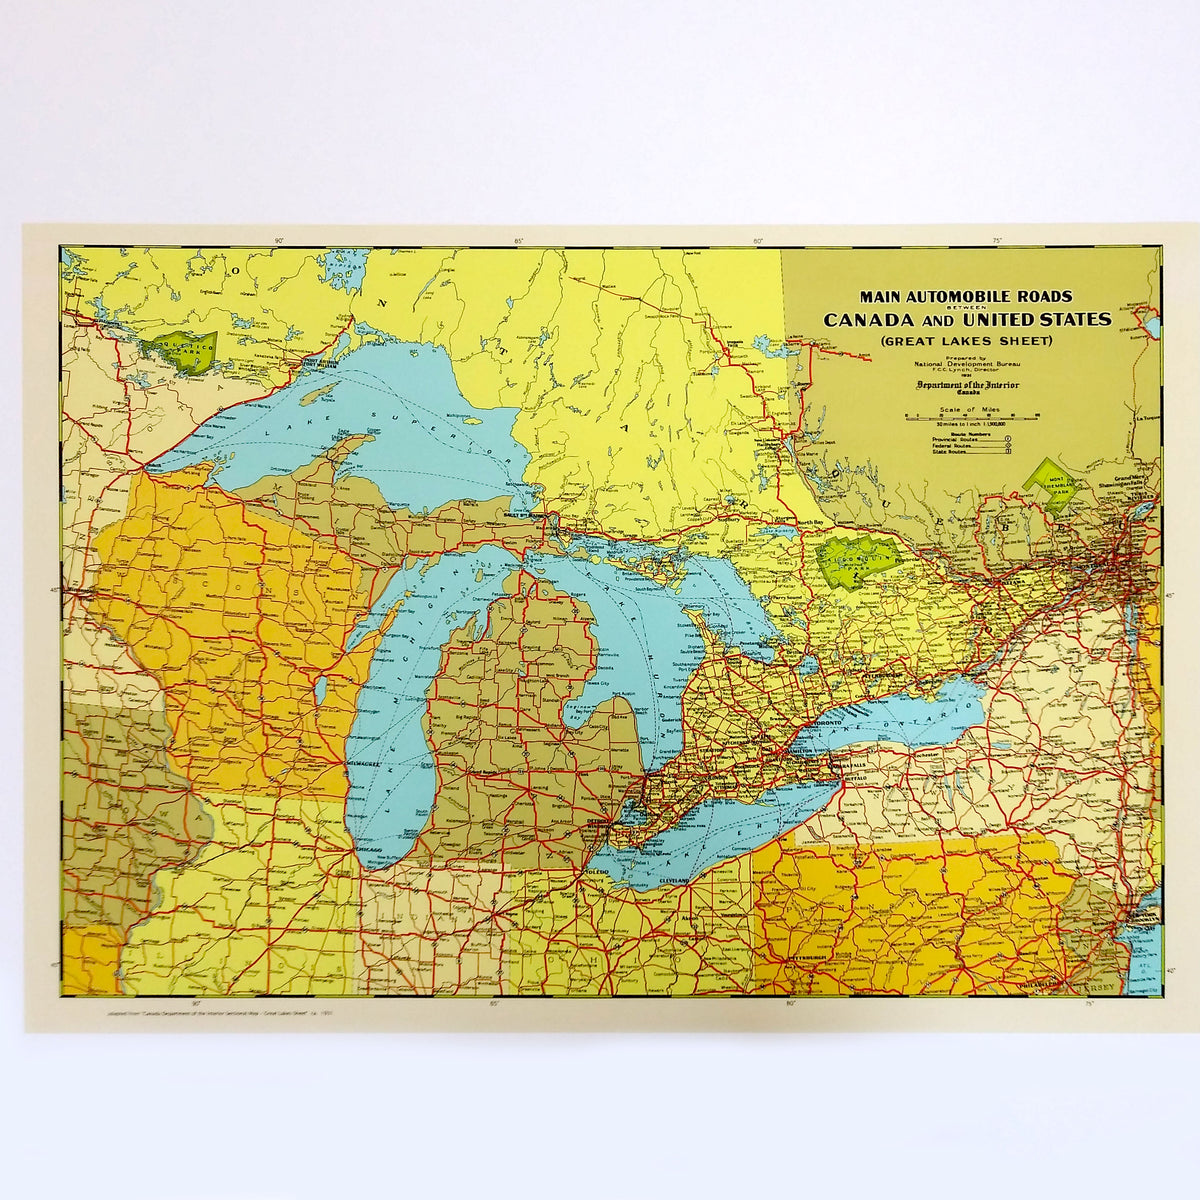 Main Automobile Roads Between US and Canada - Vintage Map Reproduction